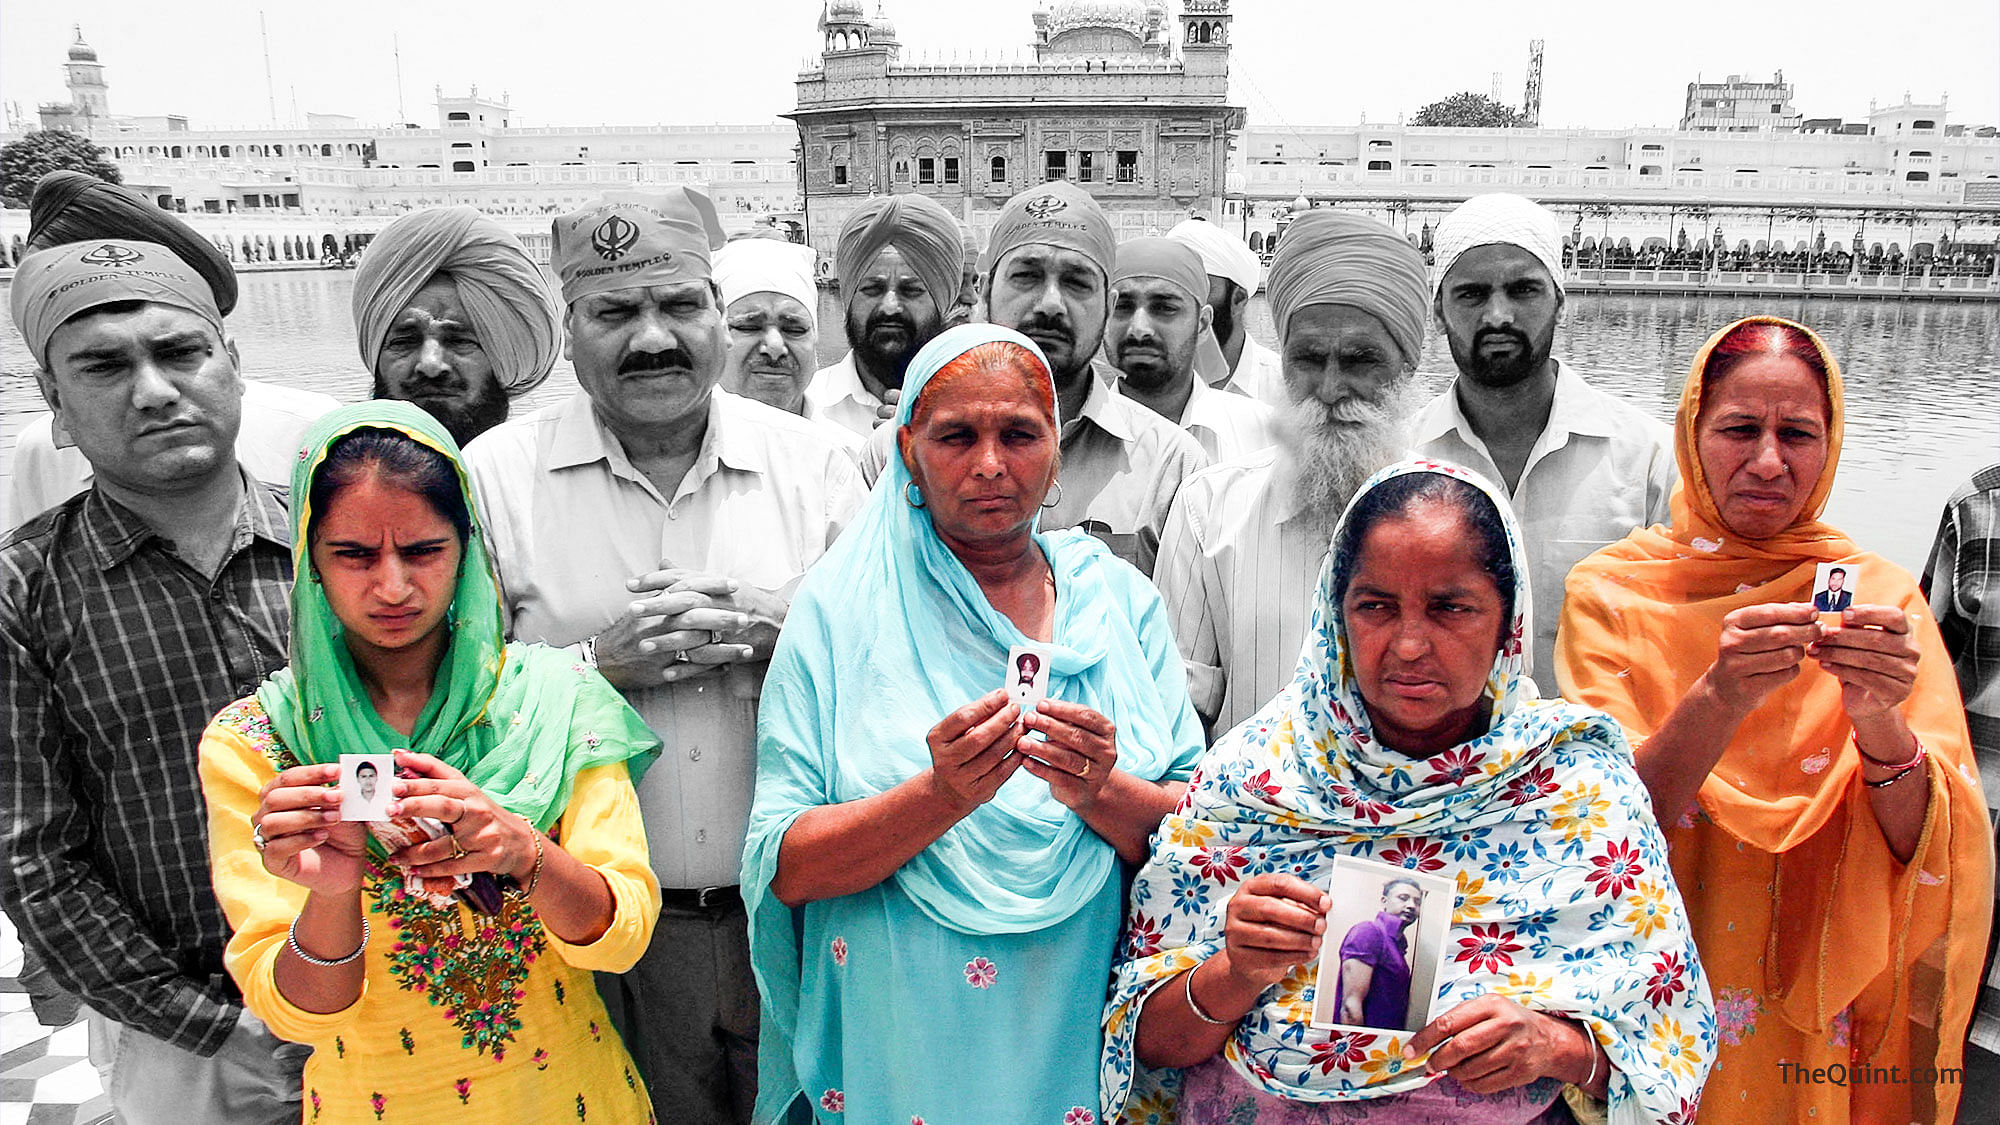 Relatives pose with the photographs of Indian workers, who have been abducted in Iraq, in front of the Golden Temple, 19 June 2014.